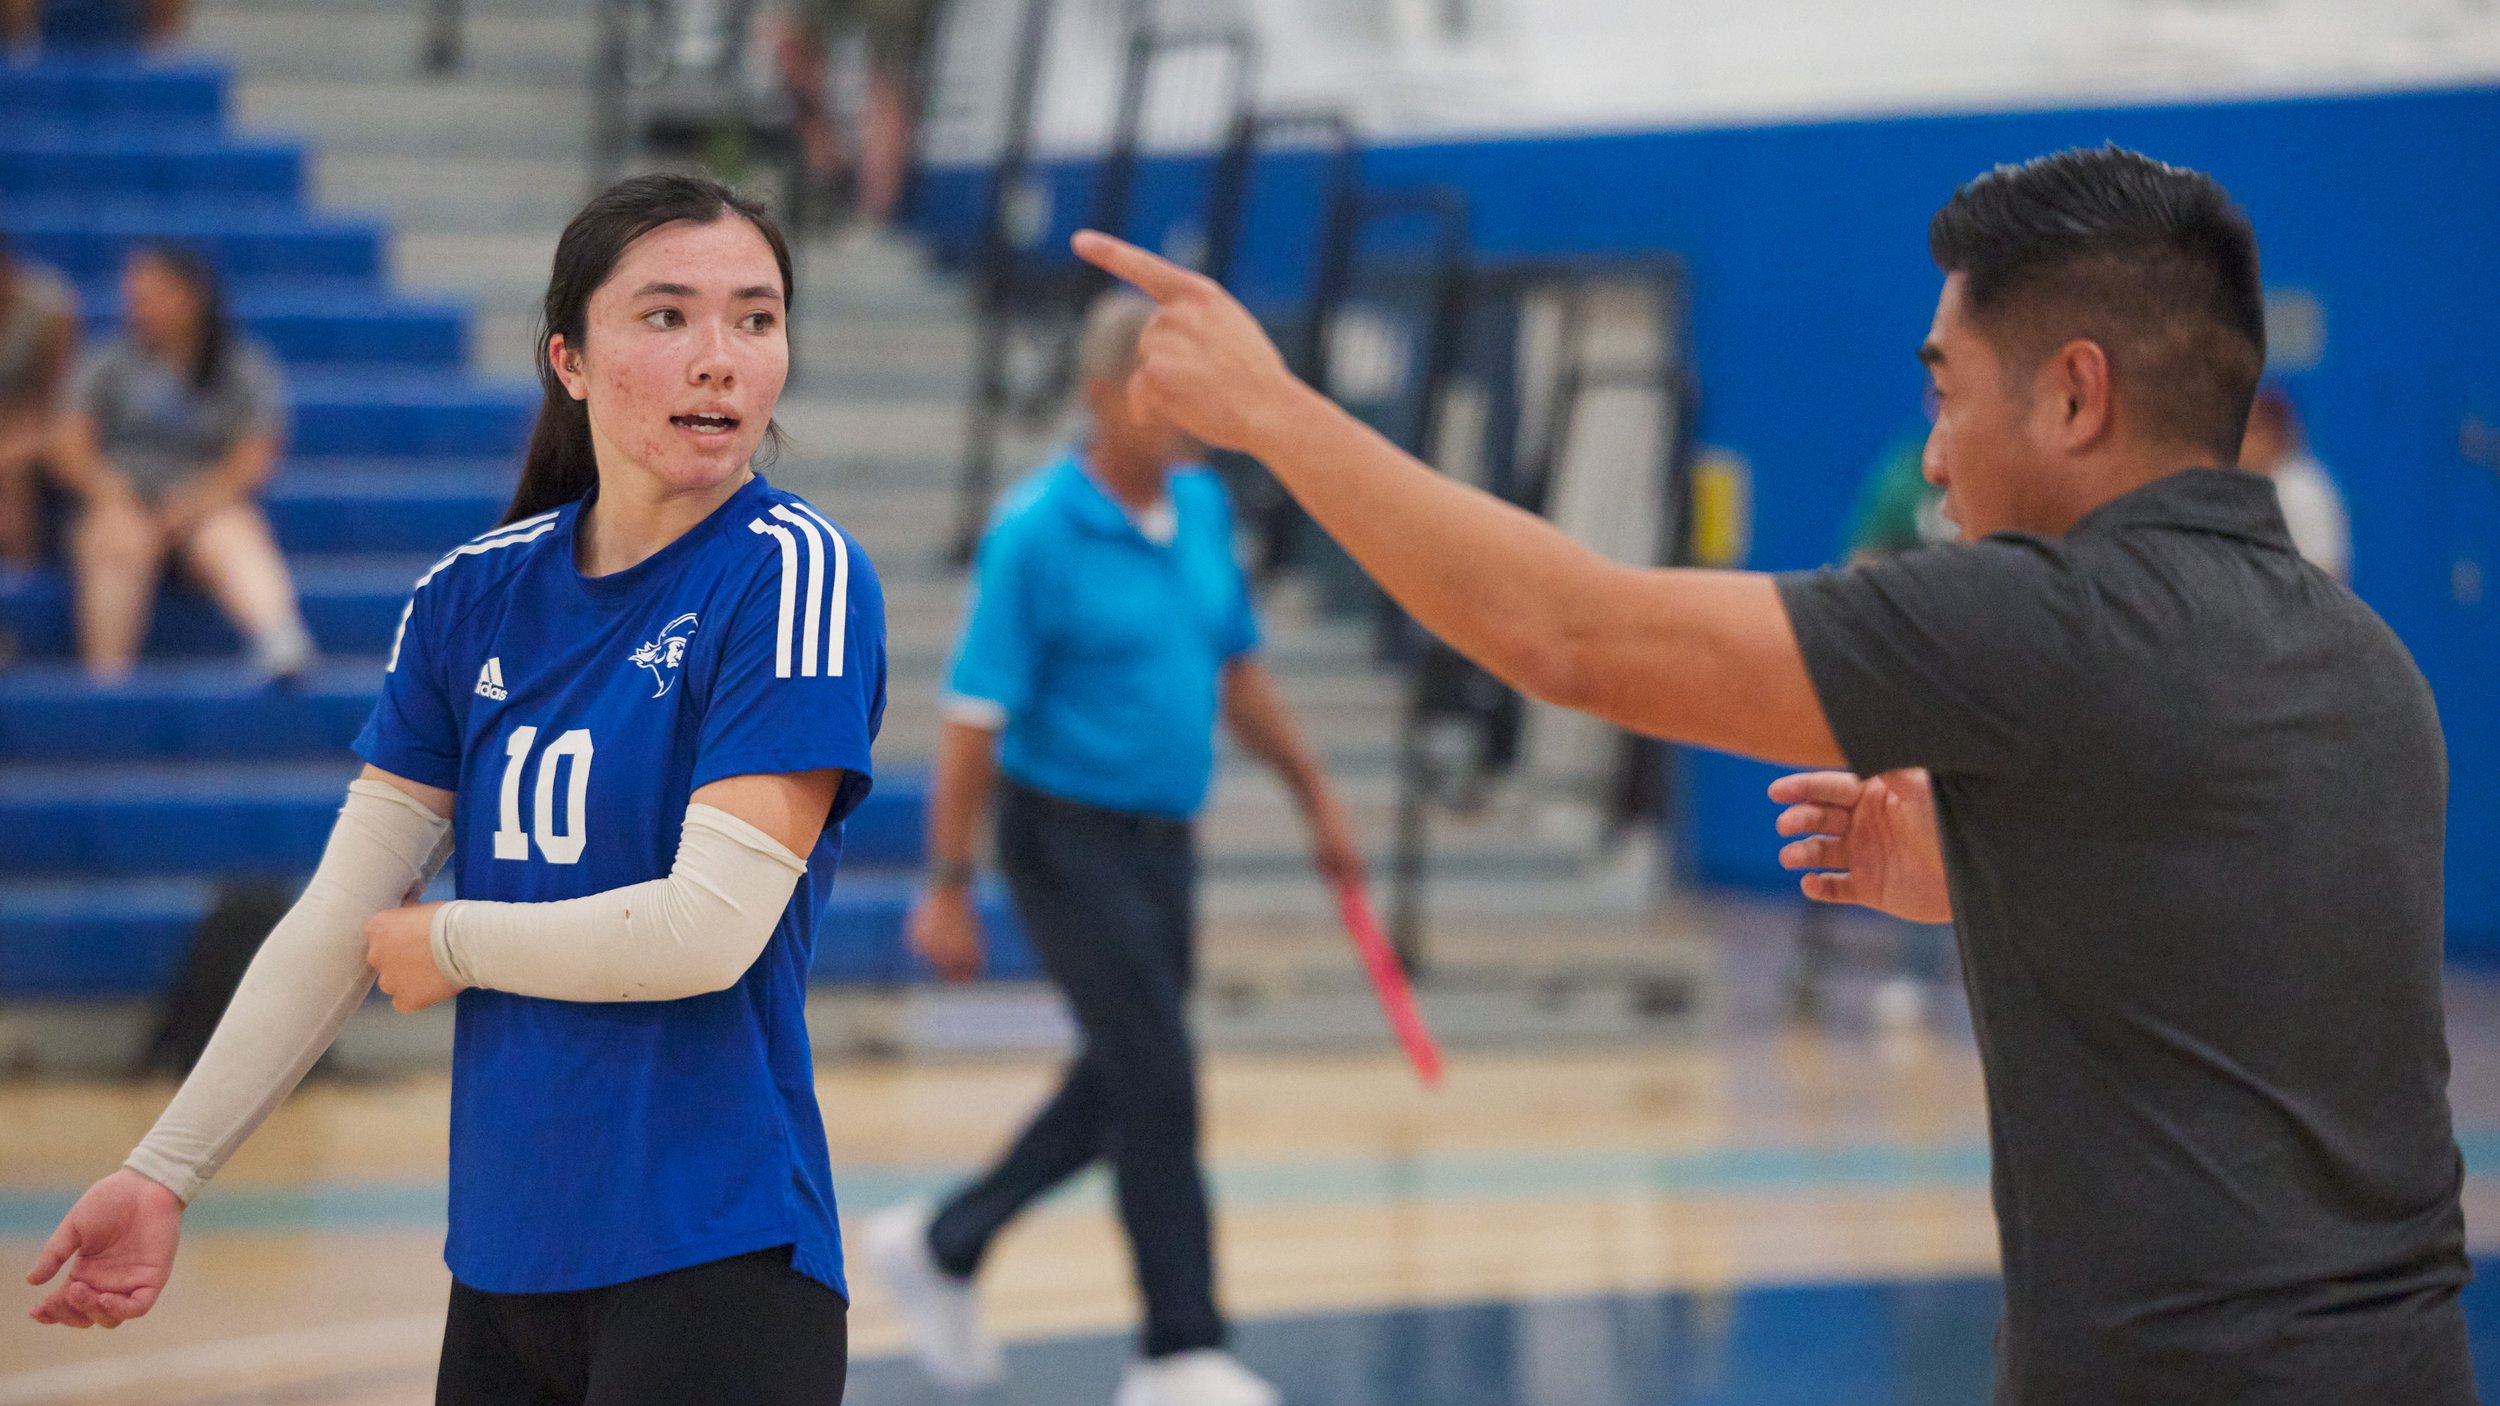  Santa Monica College Corsairs' Sophia Odle and women's volleyball head coach Christian Cammayo during the match against the Santa Barbara City College Vaqueros on Wednesday, Sept. 20, 2023, at Corsair Gym in Santa Monica, Calif. The Corsairs won 3-2